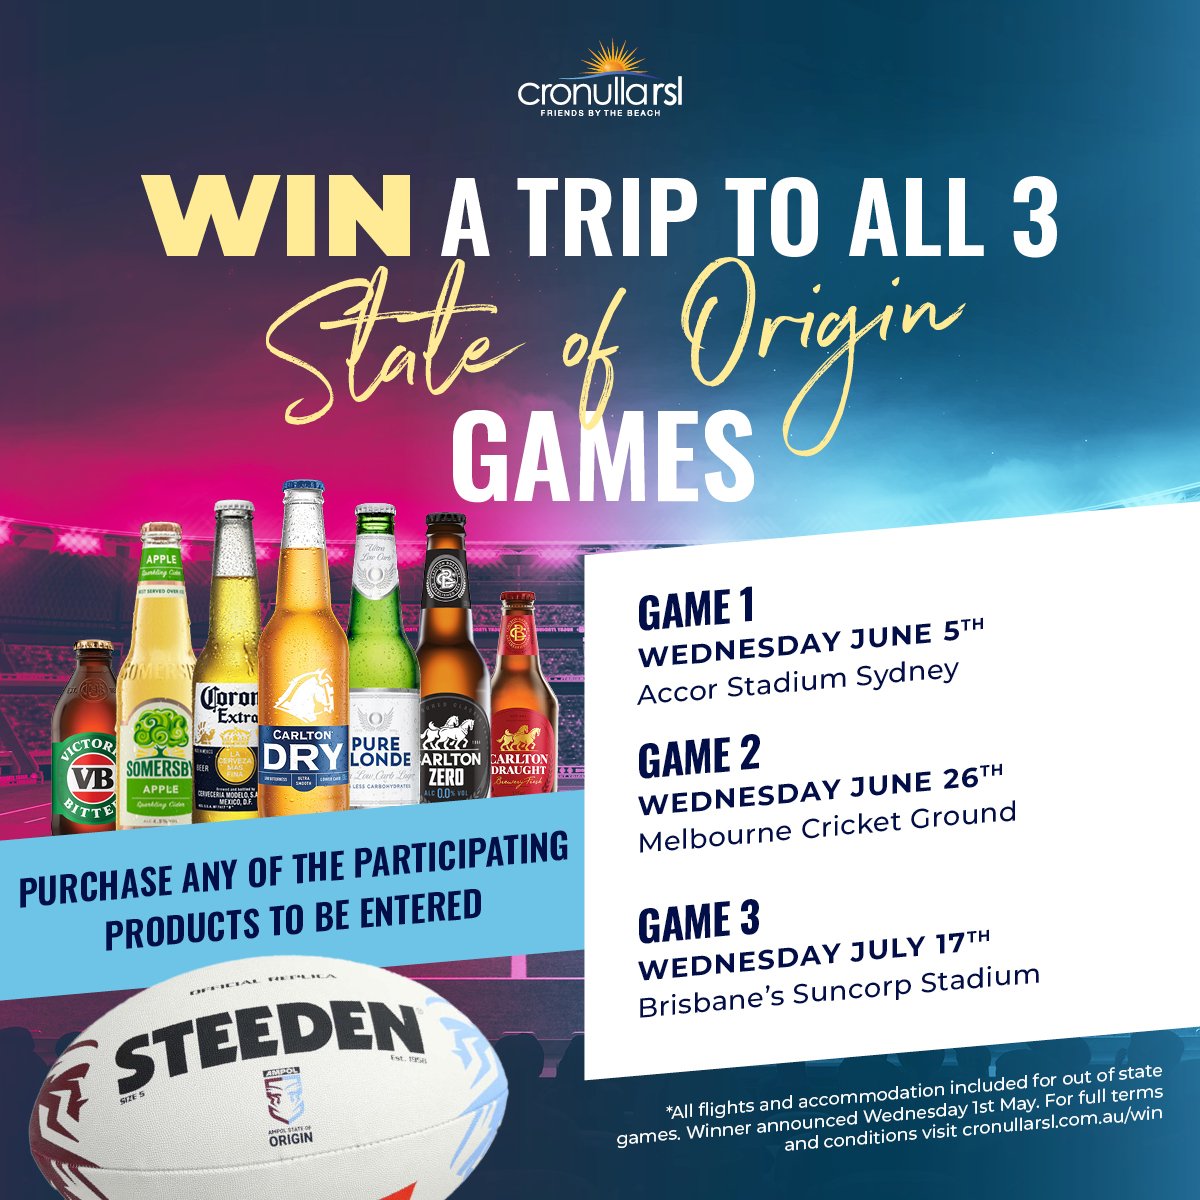 🏉🌟 This is your opportunity to score big at Cronulla RSL! 

Purchase any of our featured items to be automatically entered into the draw for a chance to win a trip to all 3 STATE OF ORIGIN Games! Flights and accommodation are included for out-of-st